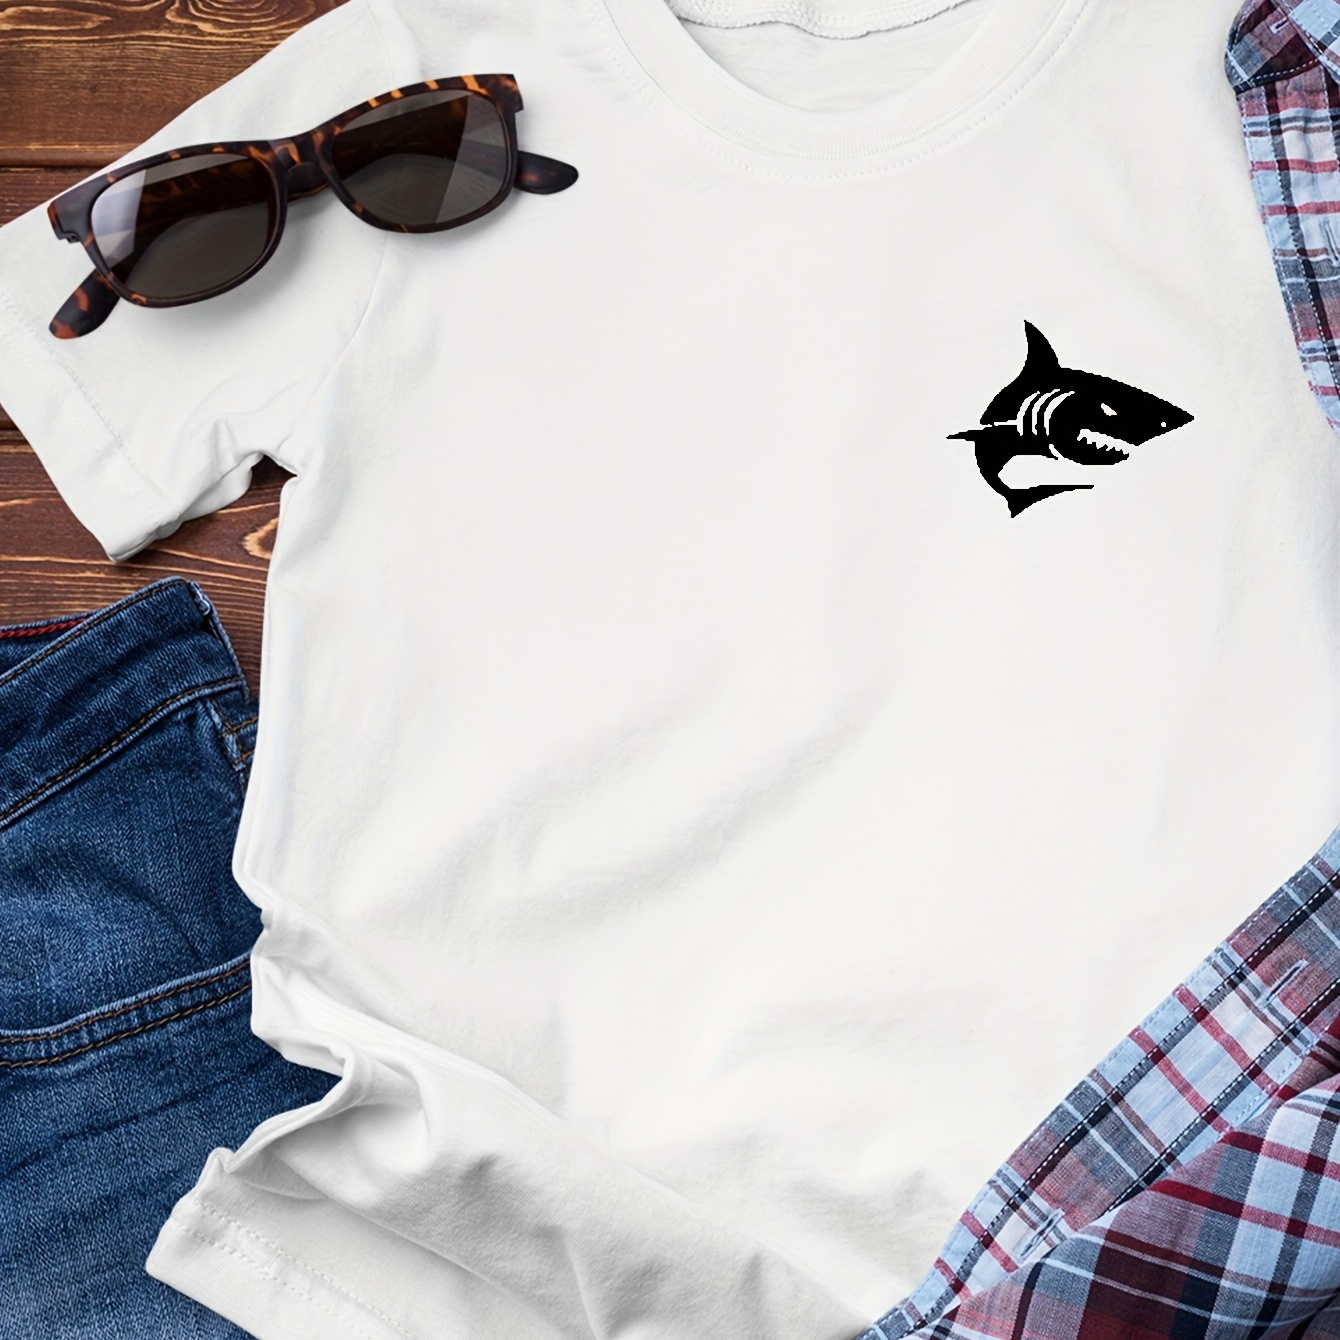 

Simple Shark Graphic Print Men's Pure Cotton T-shirt, Crew Neck Short Sleeve Tees For Summer, Casual Comfortable Versatile Top For Daily Wear & Outdoor Activities, As Gifts